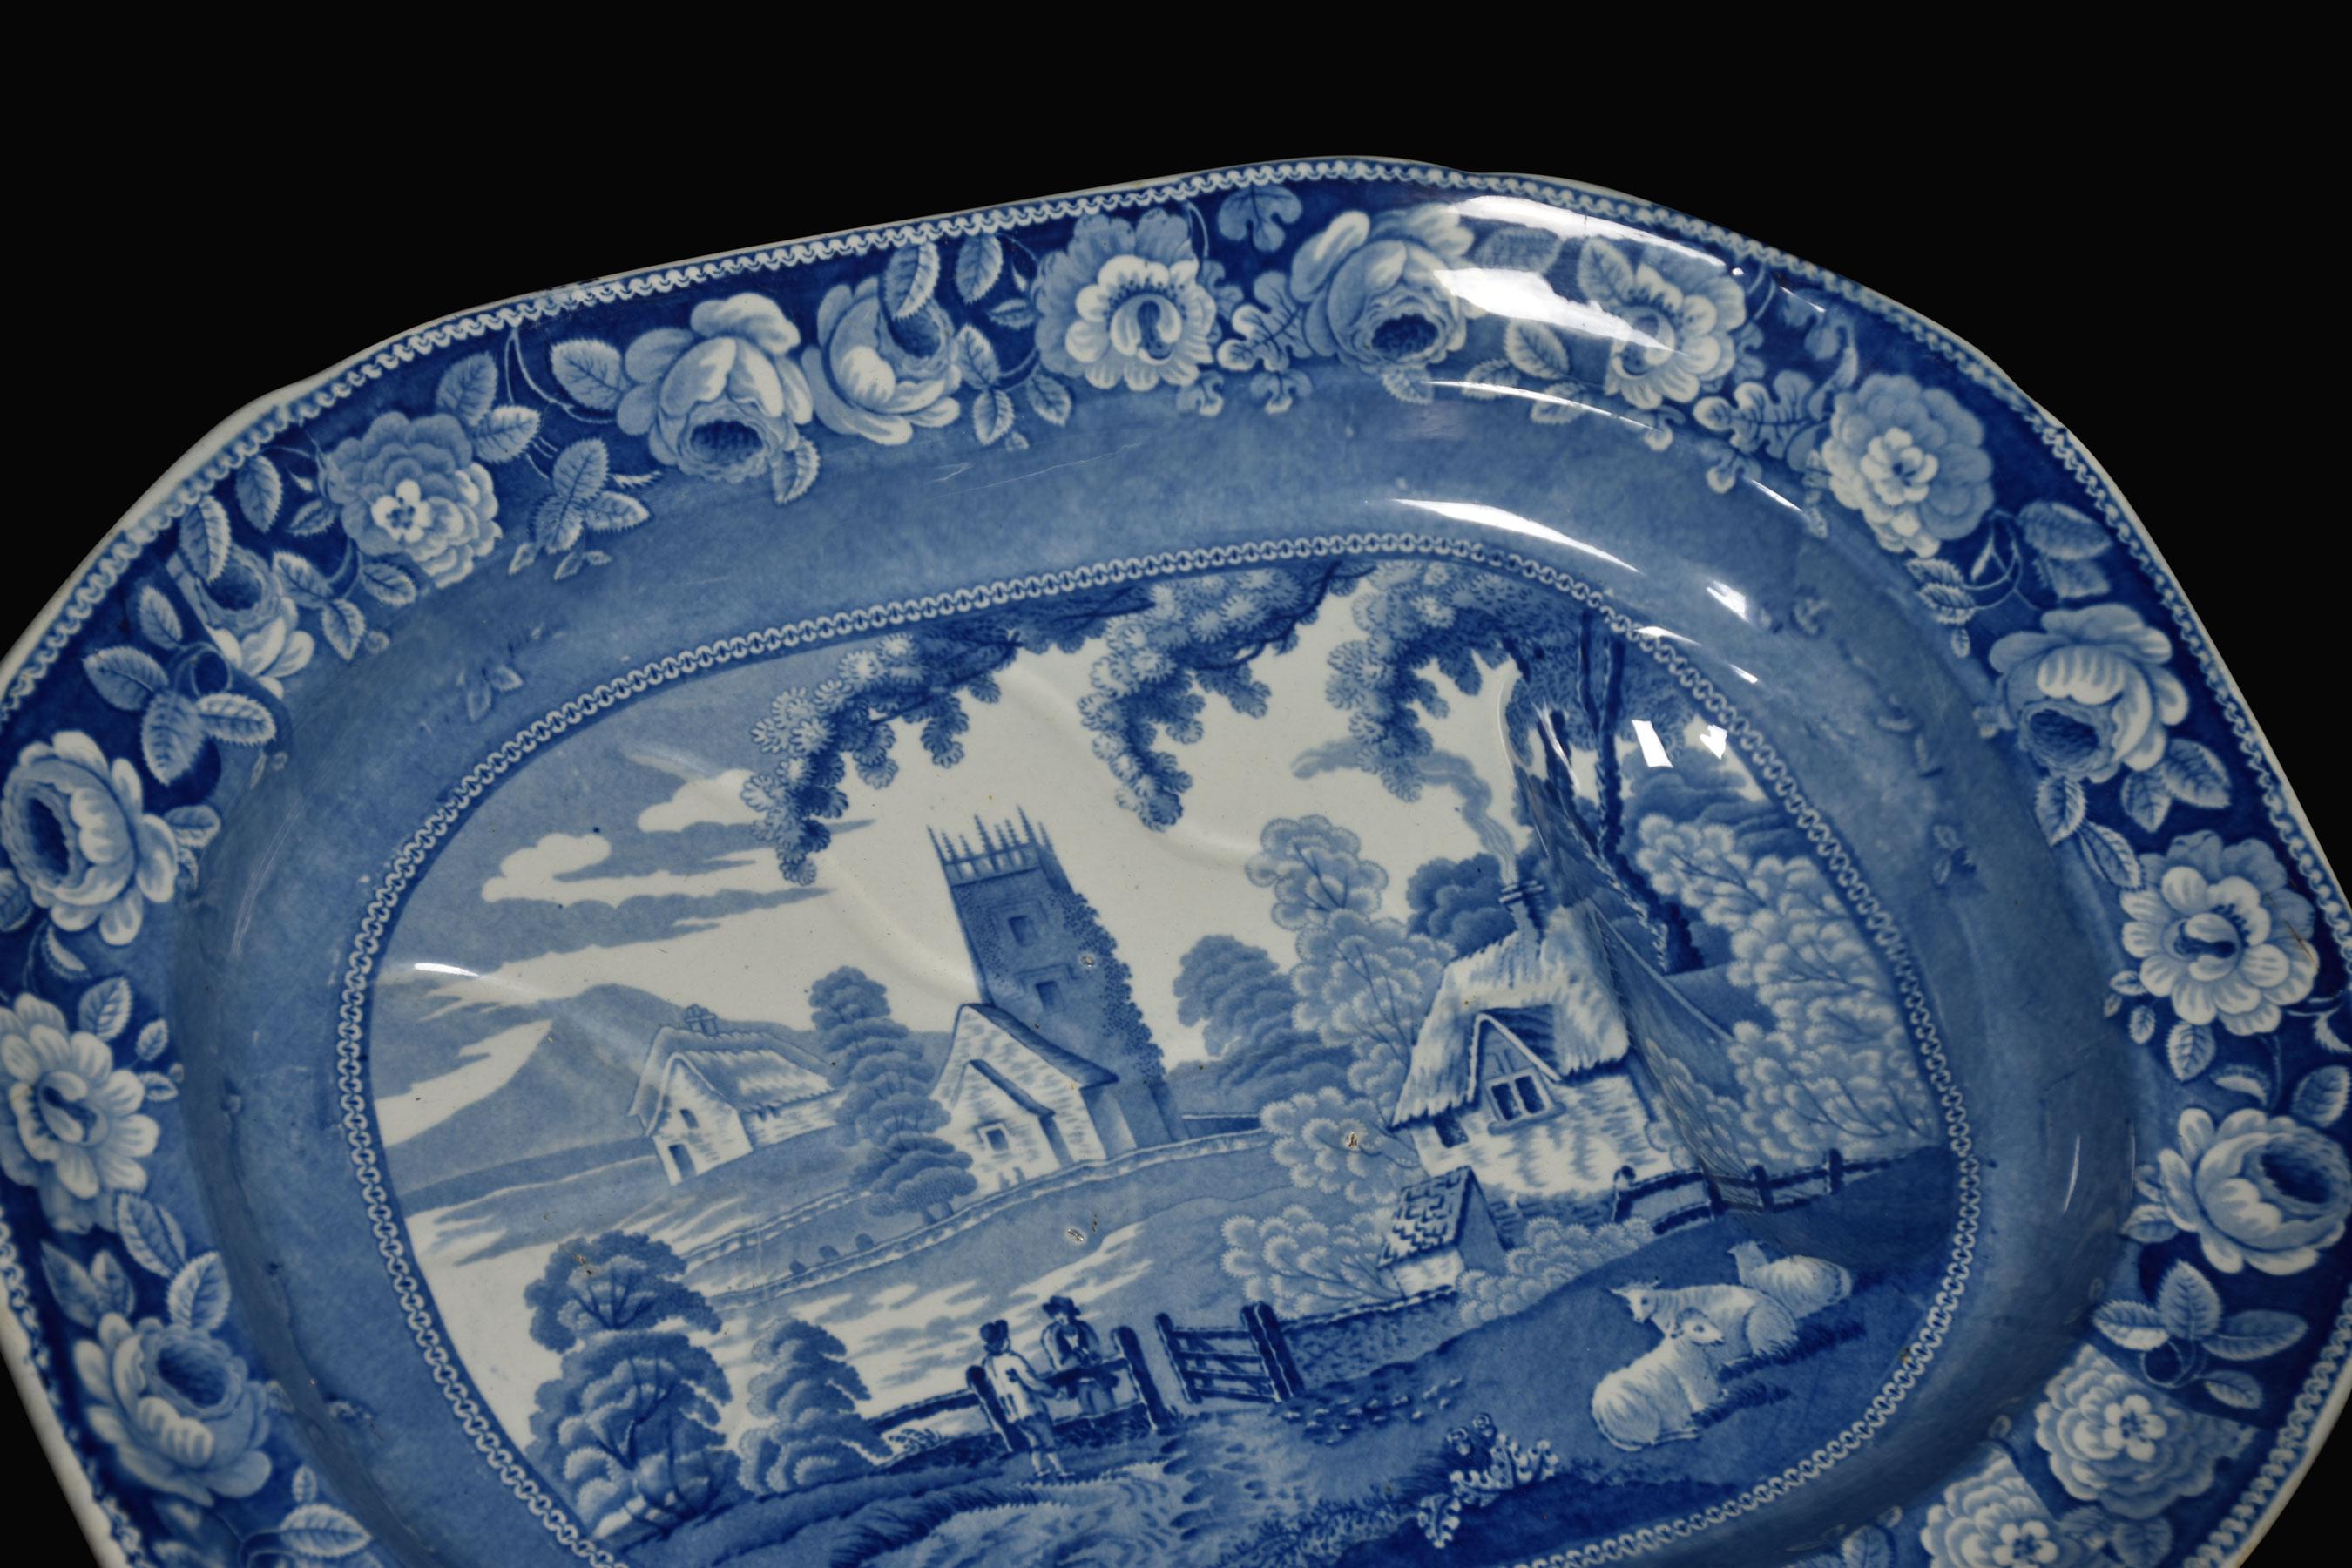 Staffordshire 19th century blue and white meat draining plate.
Dimensions
Height 2.5 inches
Width 21 inches
Depth 16 inches.